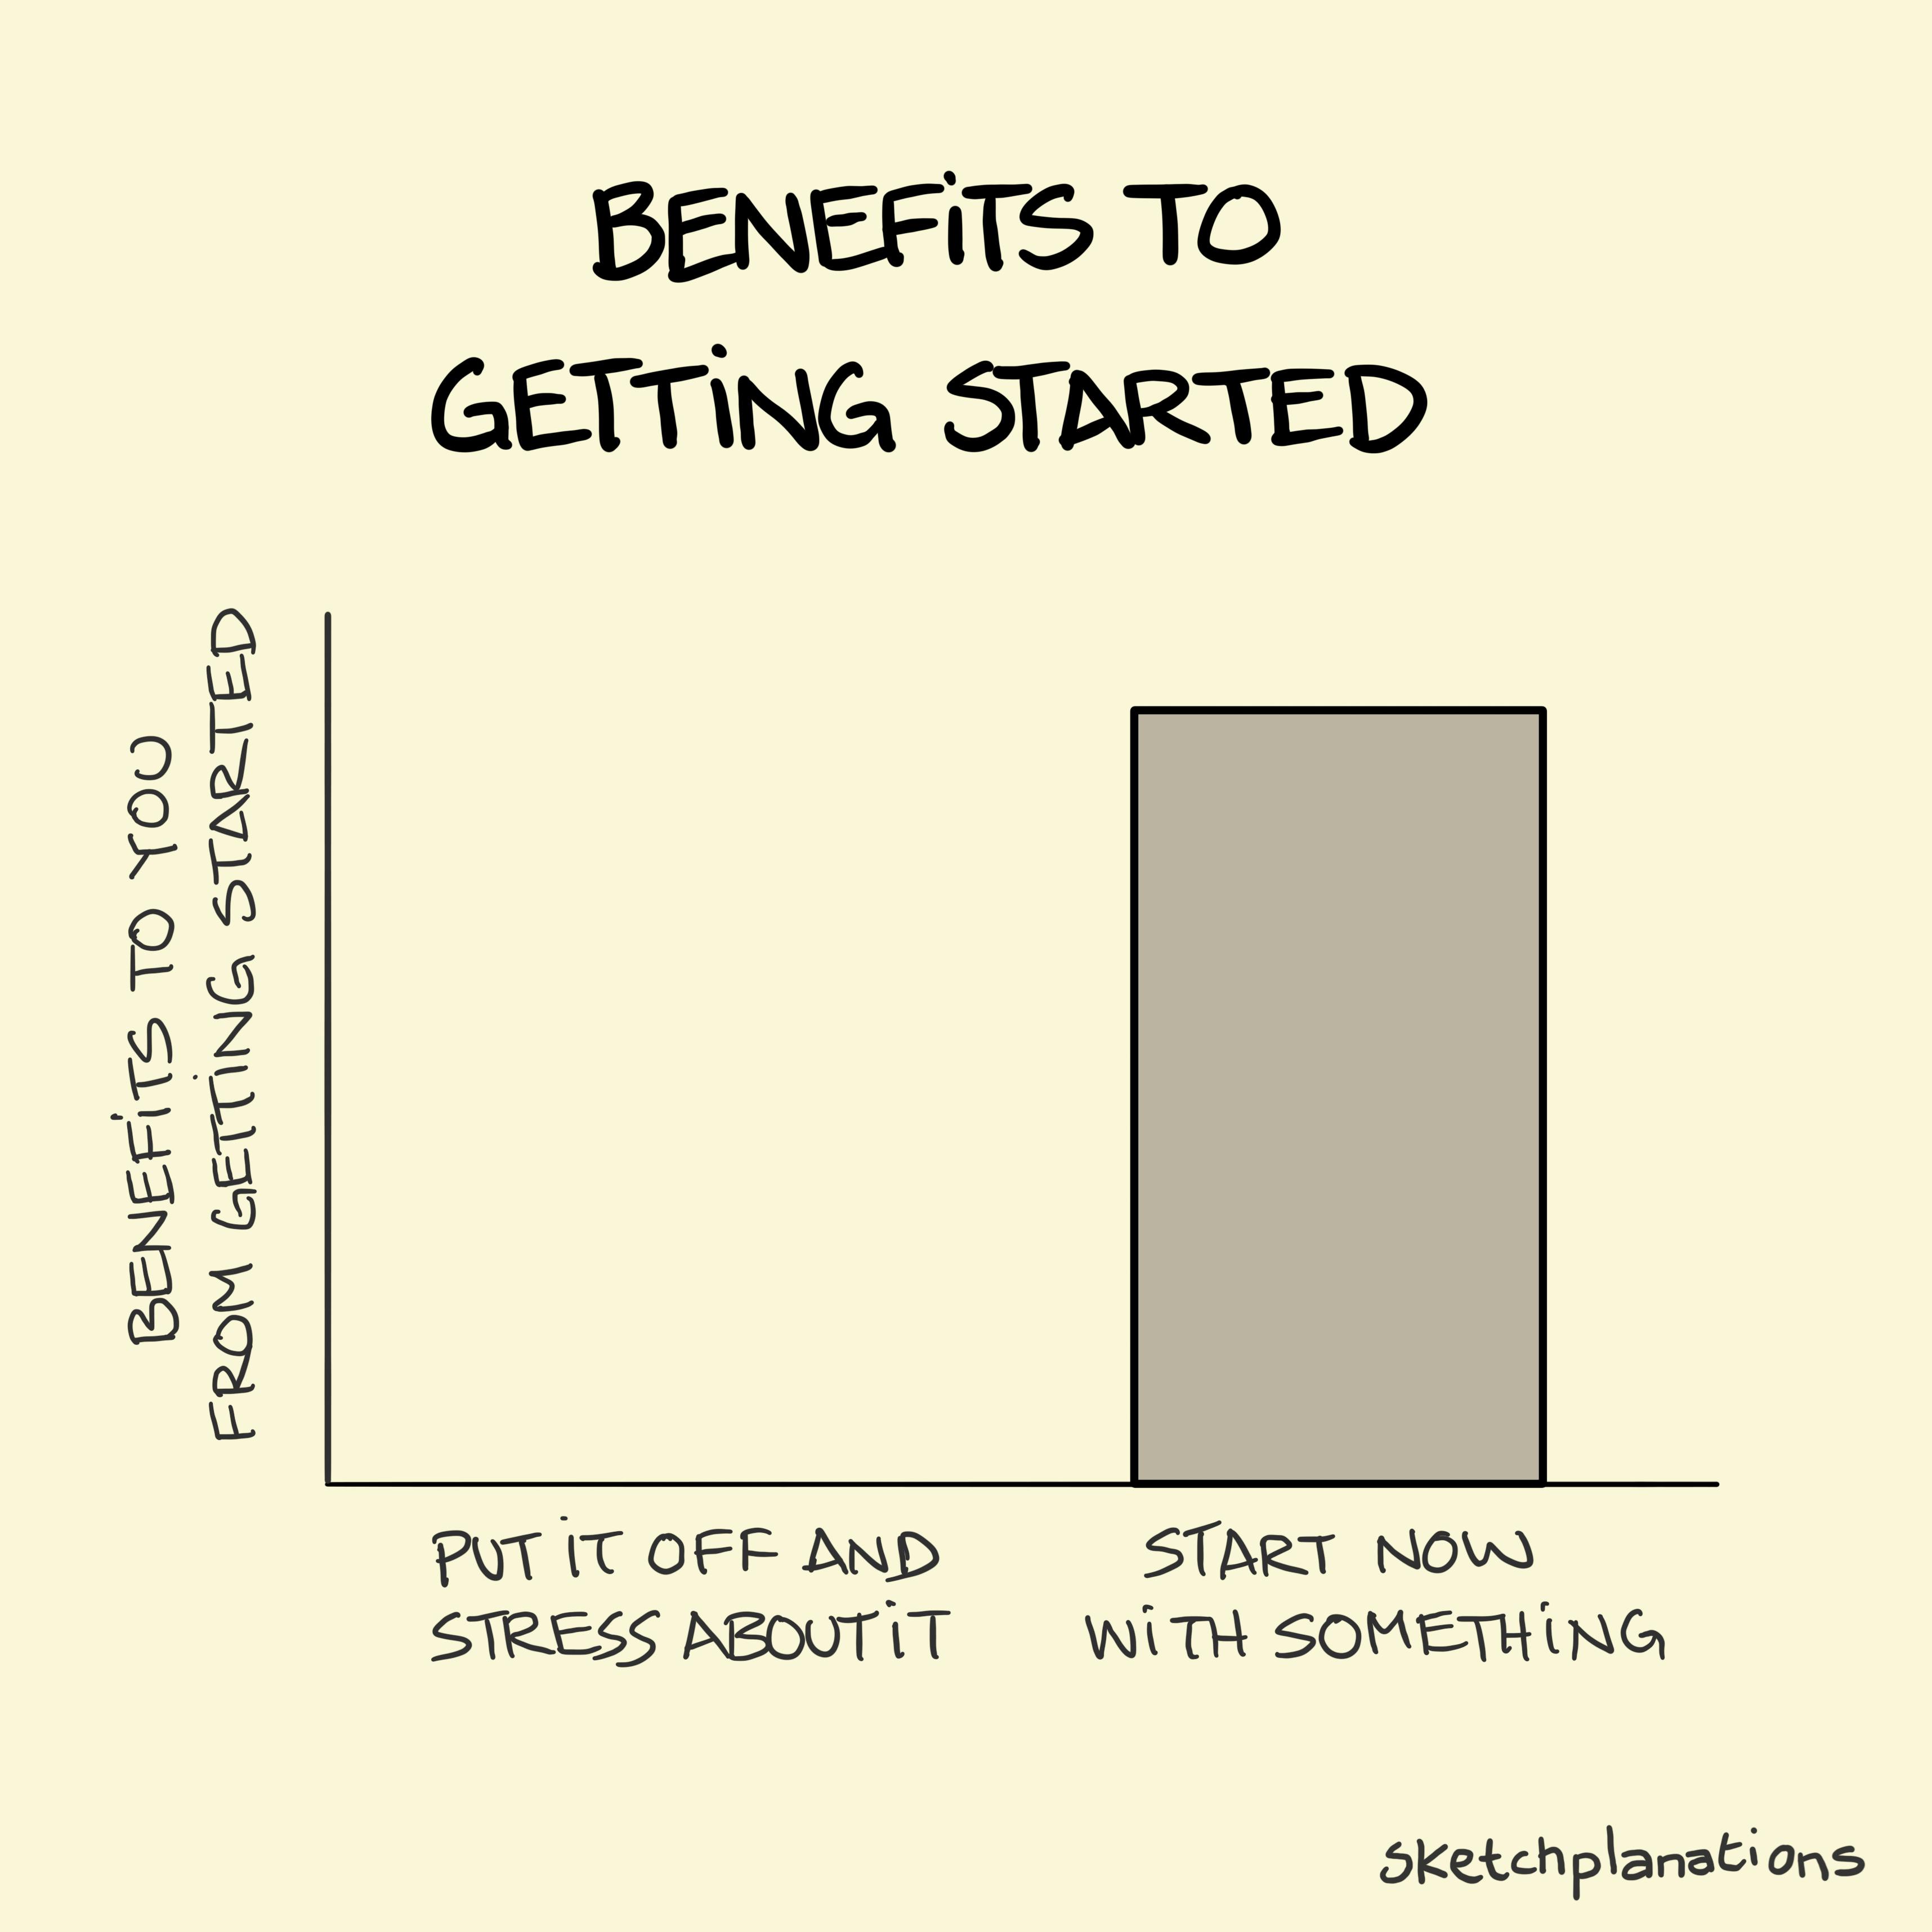 Benefits to you from getting started chart — put it off and stress about it = no benefit, start now with something = some benefit